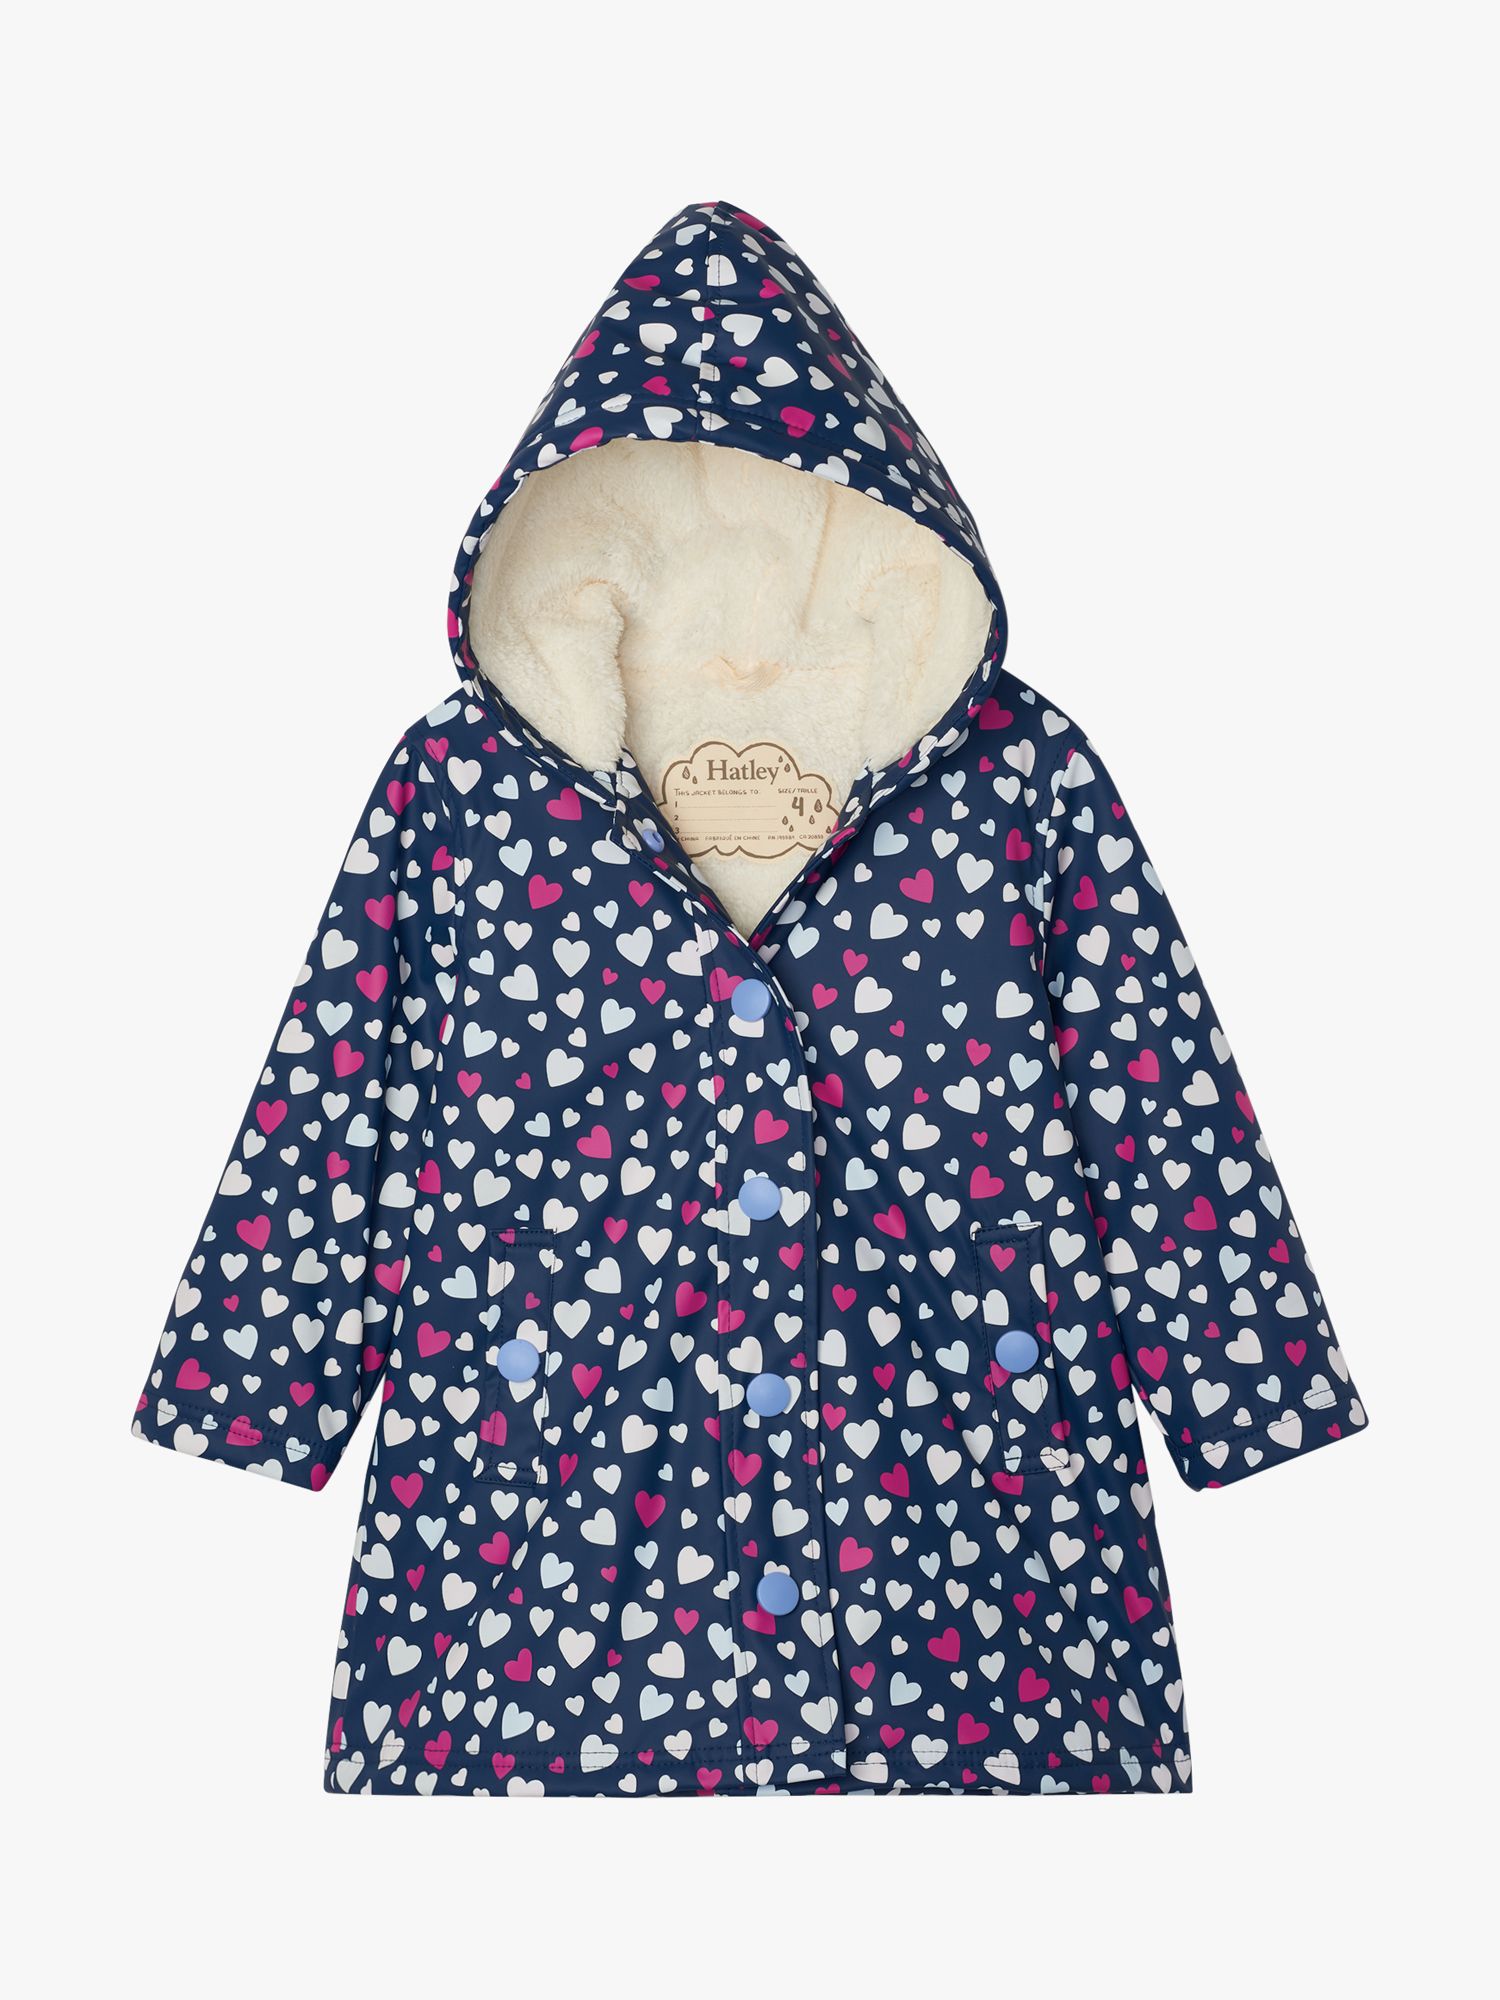 Image of Hatley Girls Colour Changing Heart Waterproof Sherpa Lined Jacket